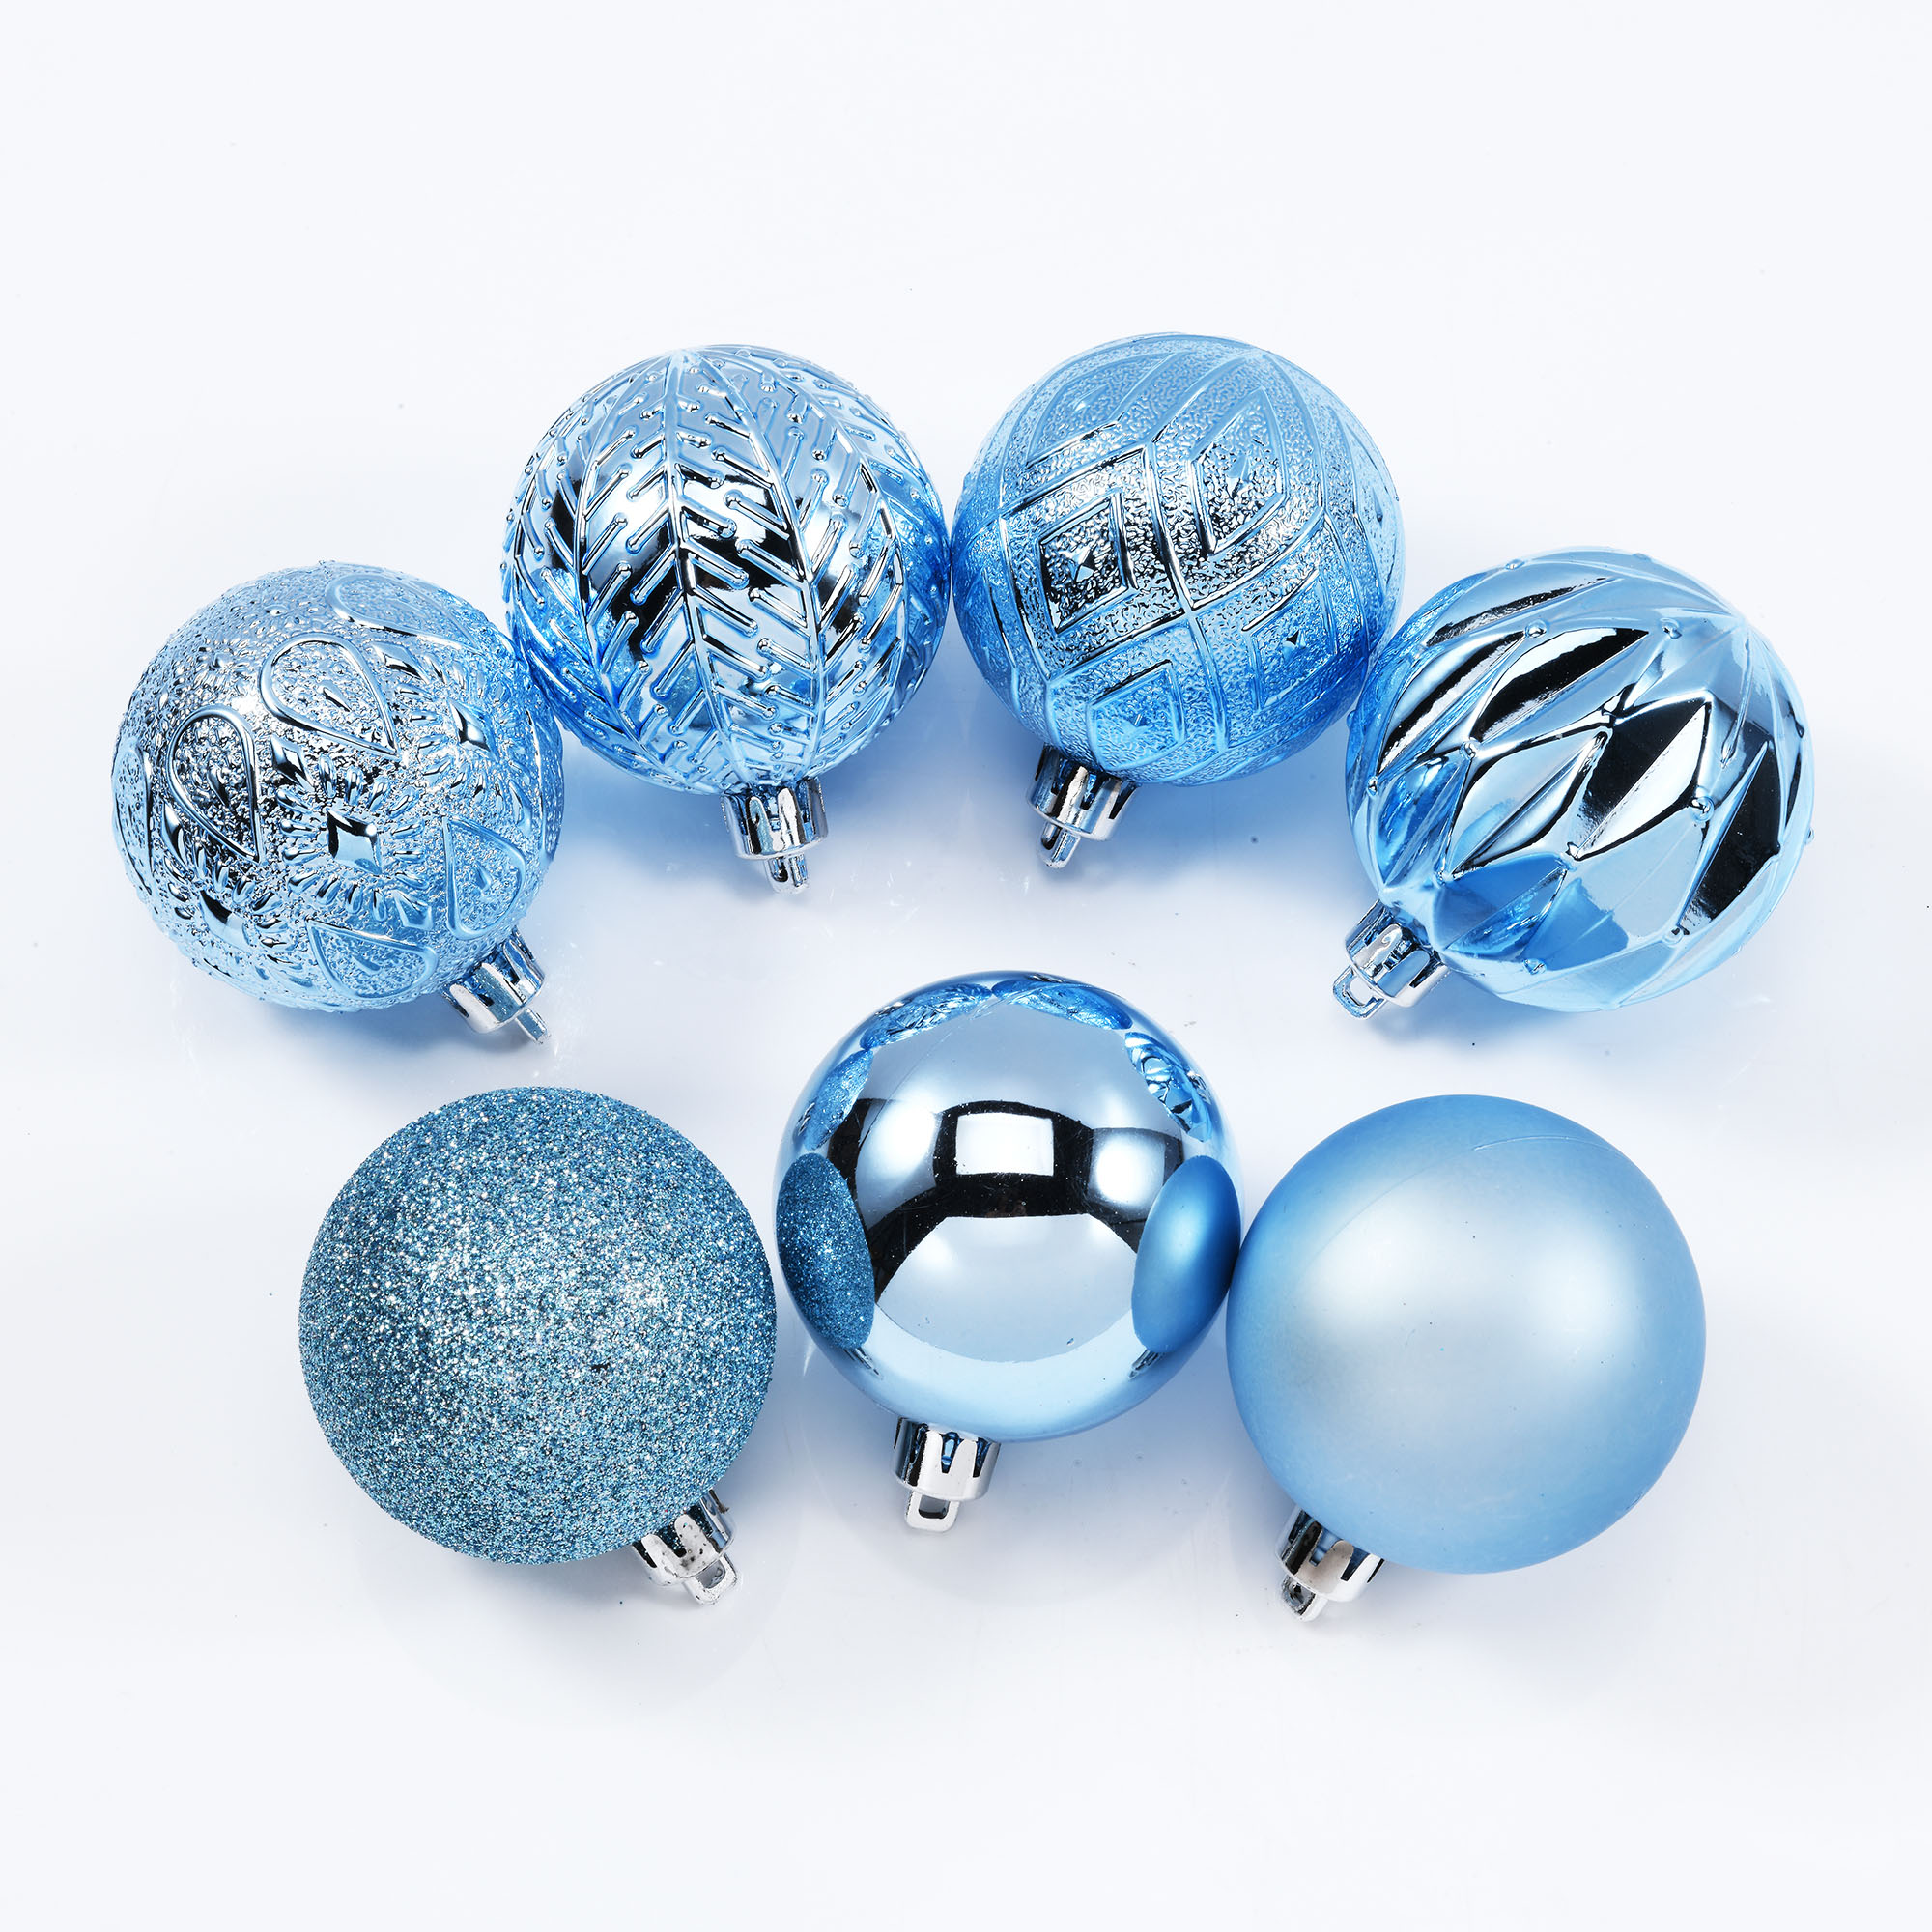 Holiday Time 60 mm Multi-textured Christmas Shatterproof Ornaments, Light Slate Blue, 26 Count - image 4 of 6